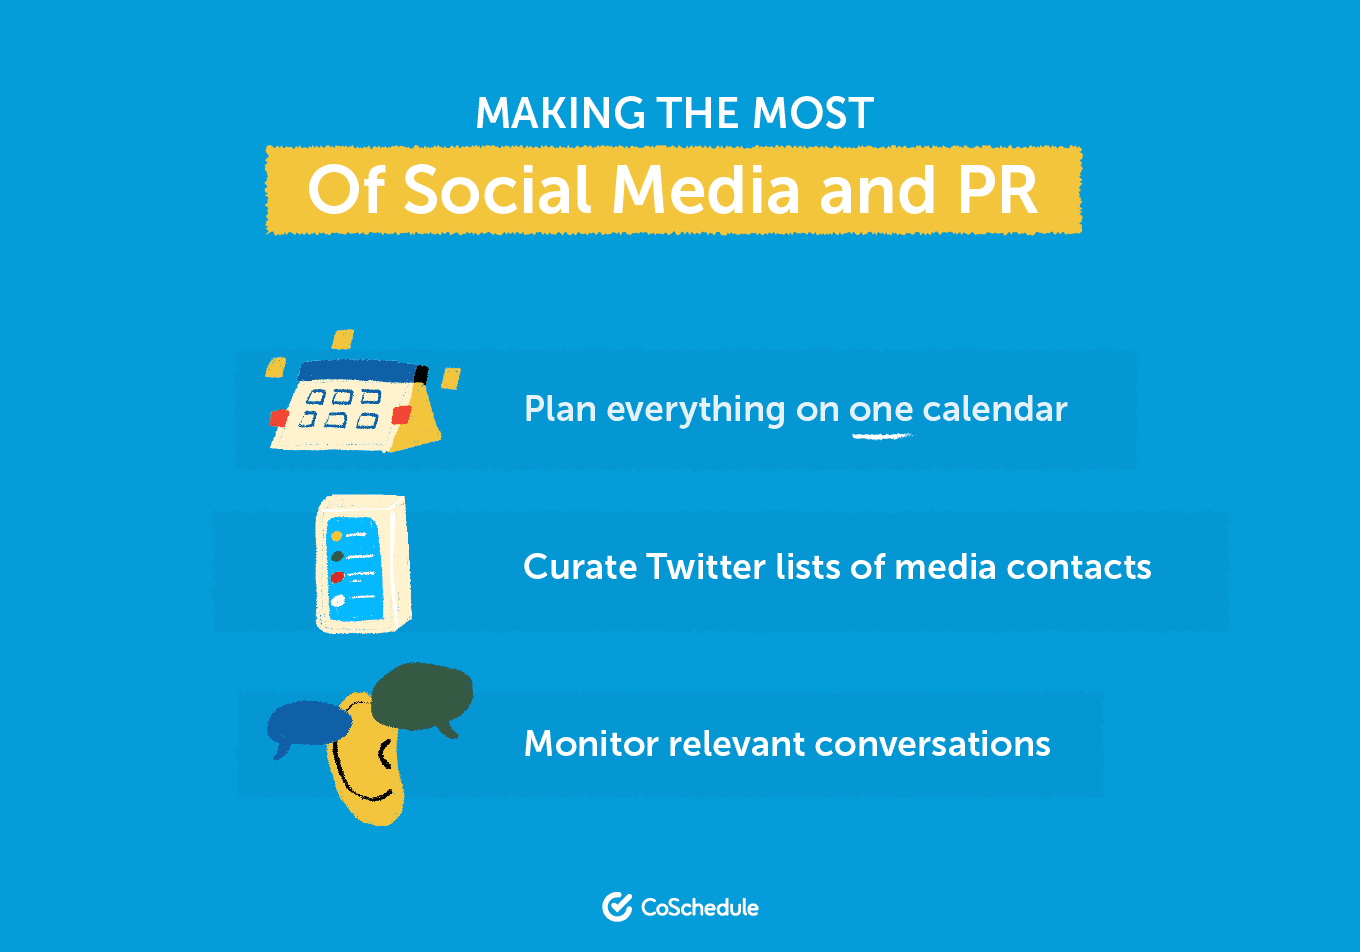 Making the most of social media and PR